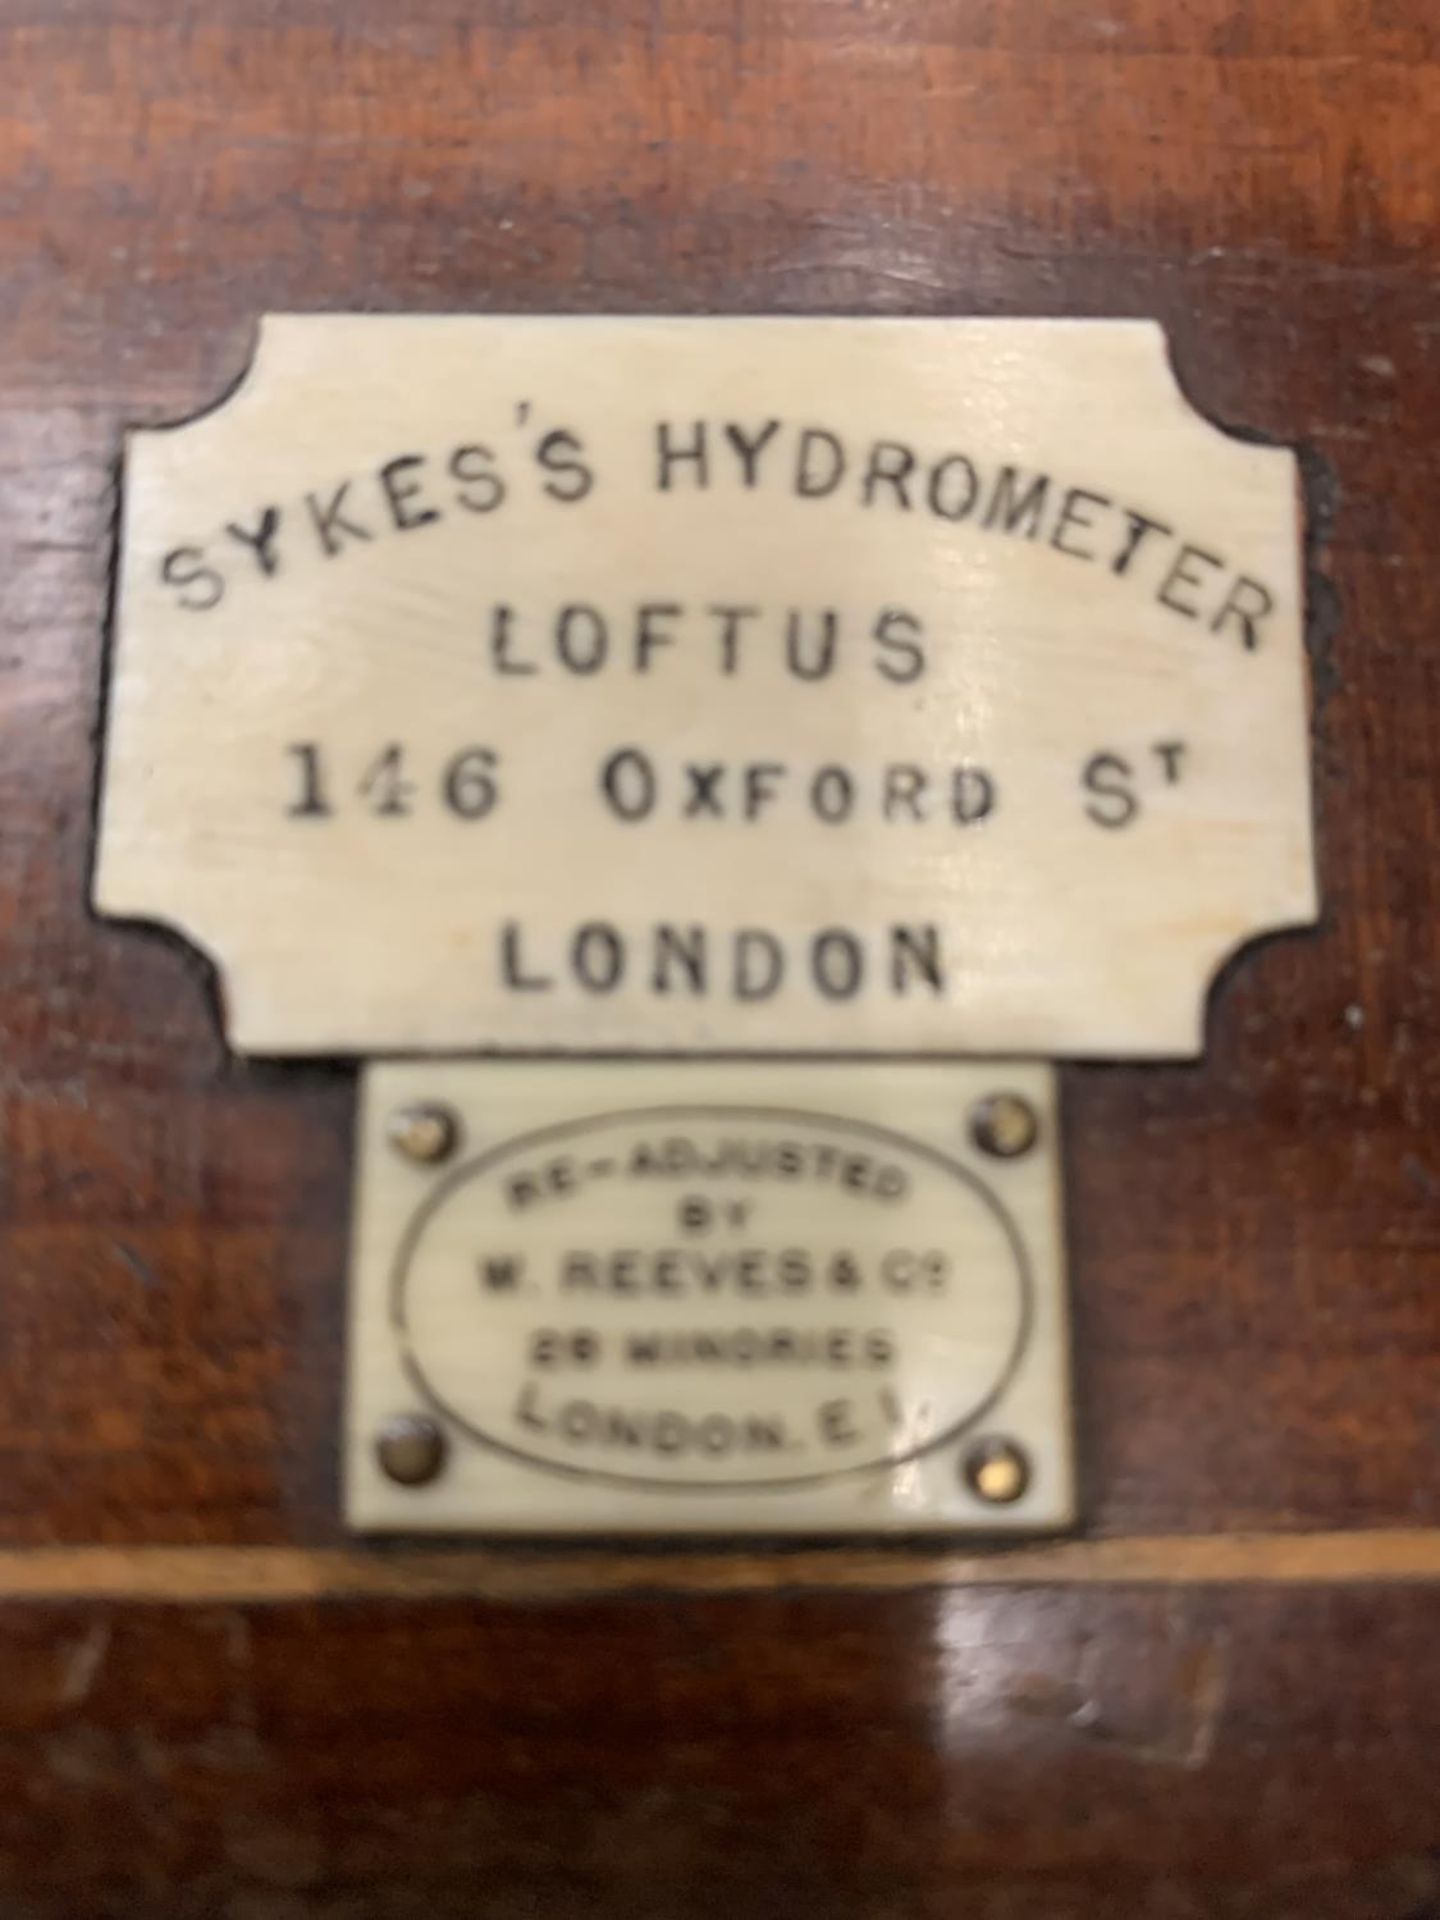 A BOXED SYKES HYDROMETER LOFTUS 146 OXFORD ST LONDON AND A VINTAGE CORK SCREW - Image 2 of 3